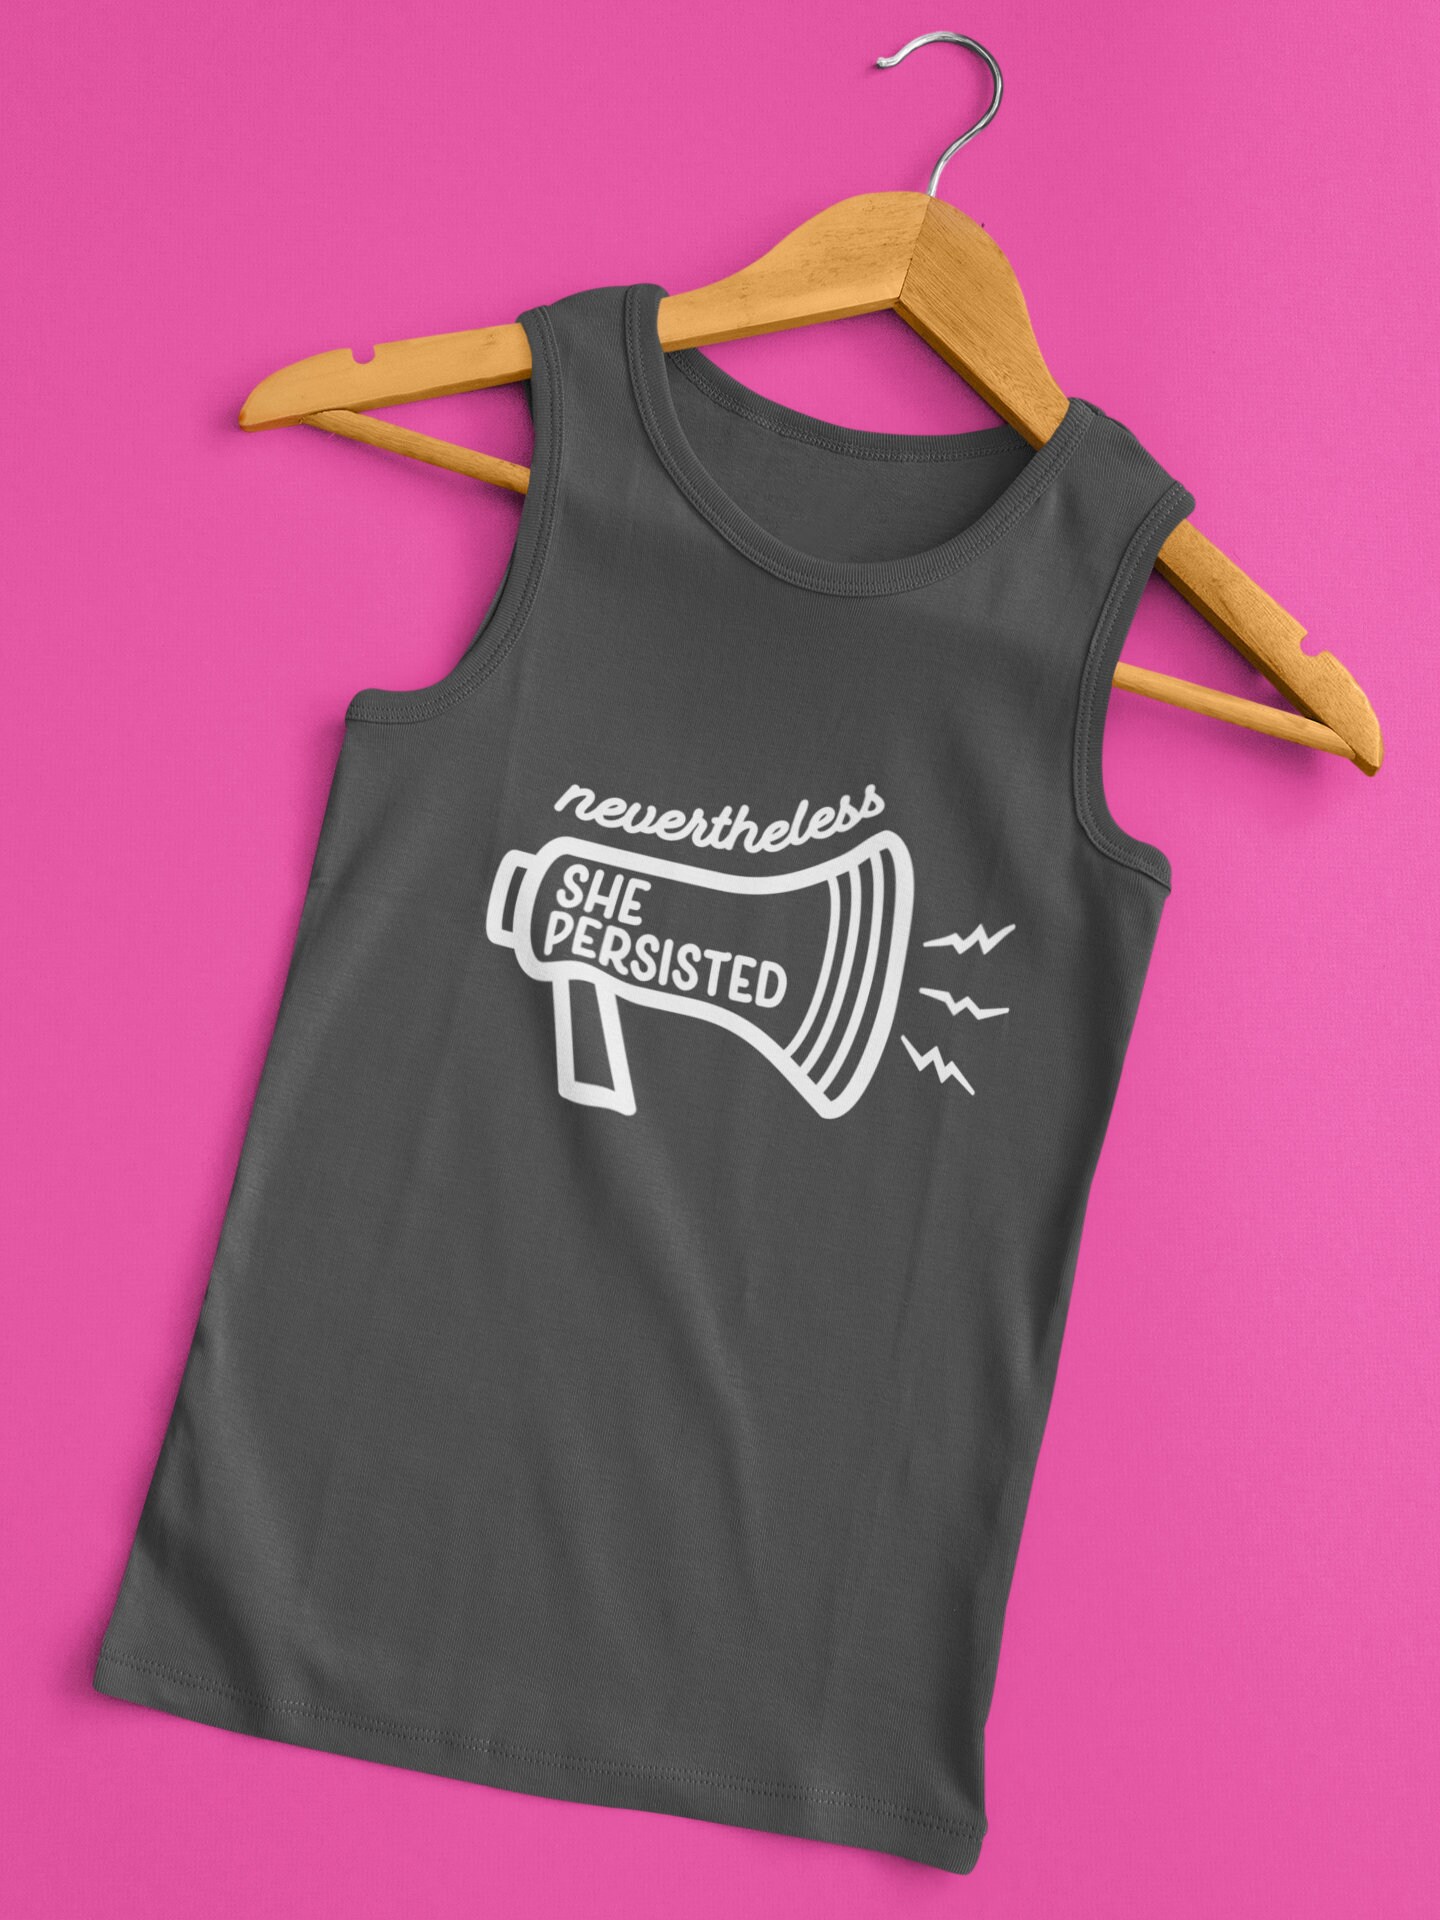 Nevertheless She Persisted Svg Cut File Digital Download for Cricut and Silhouette svg, jpeg, eps, pdf, png